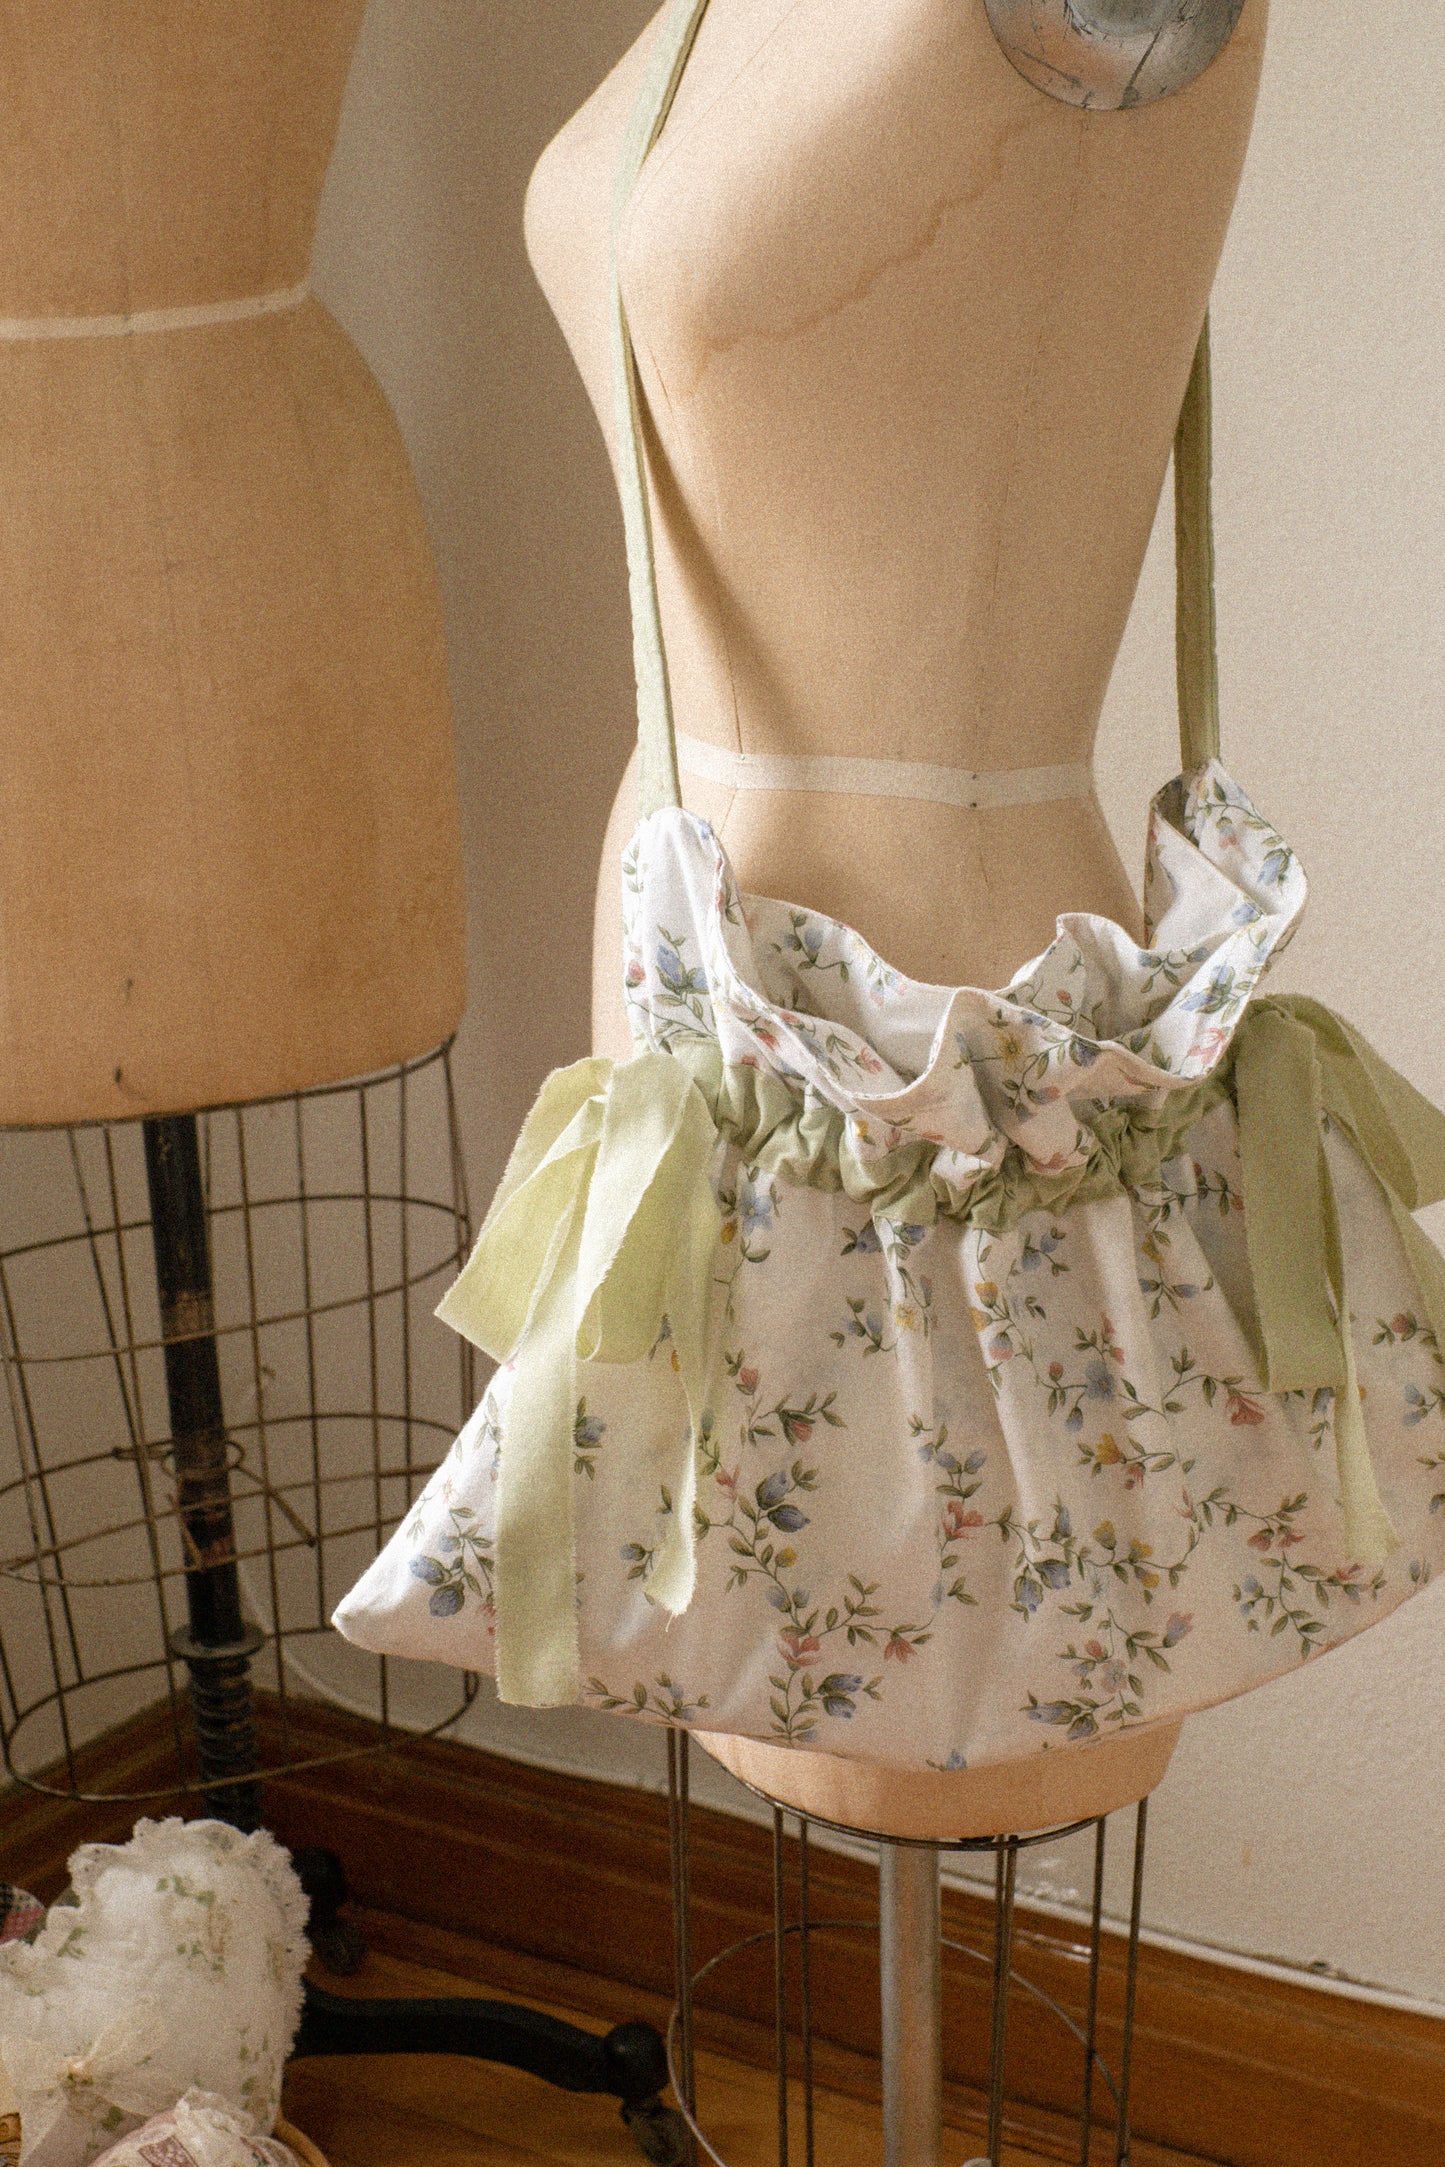 New♡ Cotton ruffled bow slouchy tote bag - Peppermint